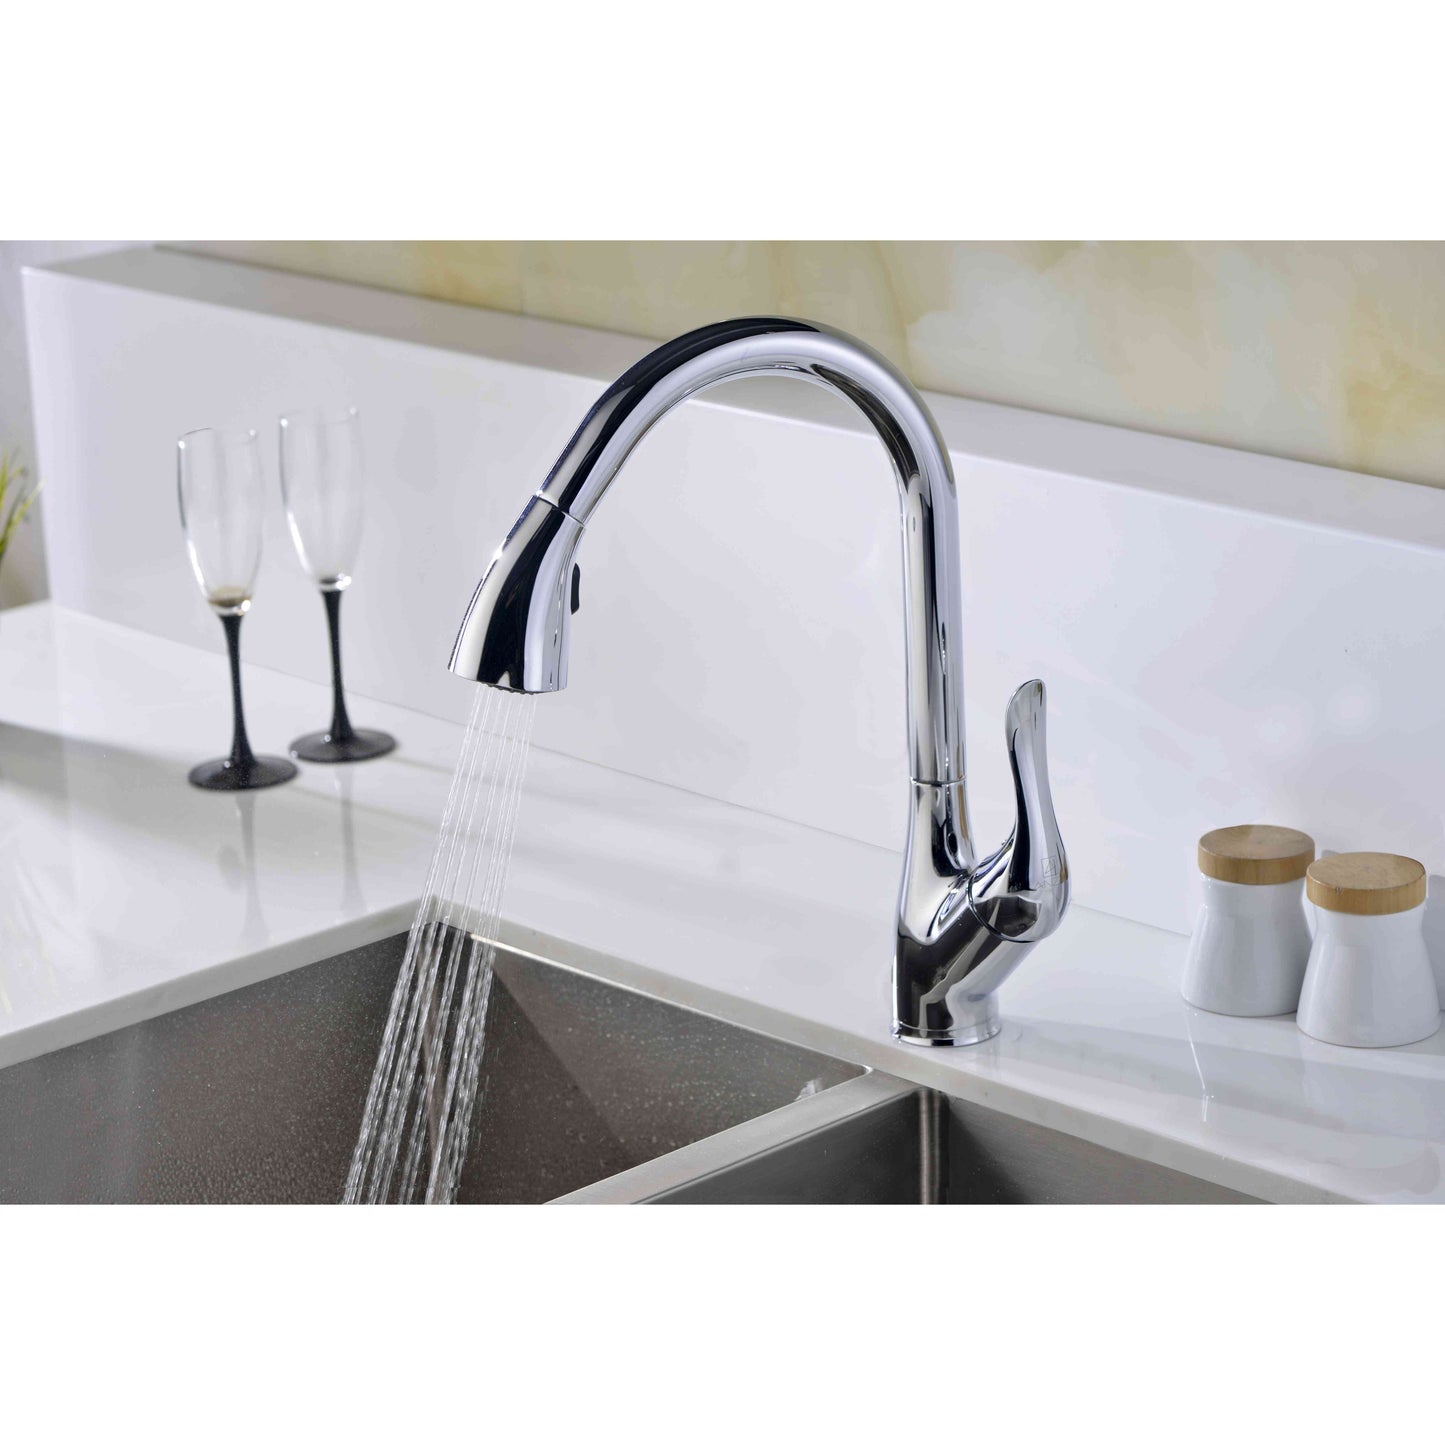 ANZZI Accent Series Single Hole Polished Chrome Kitchen Faucet With Euro-Grip Pull Down Sprayer and 360-Degree Turning Spout